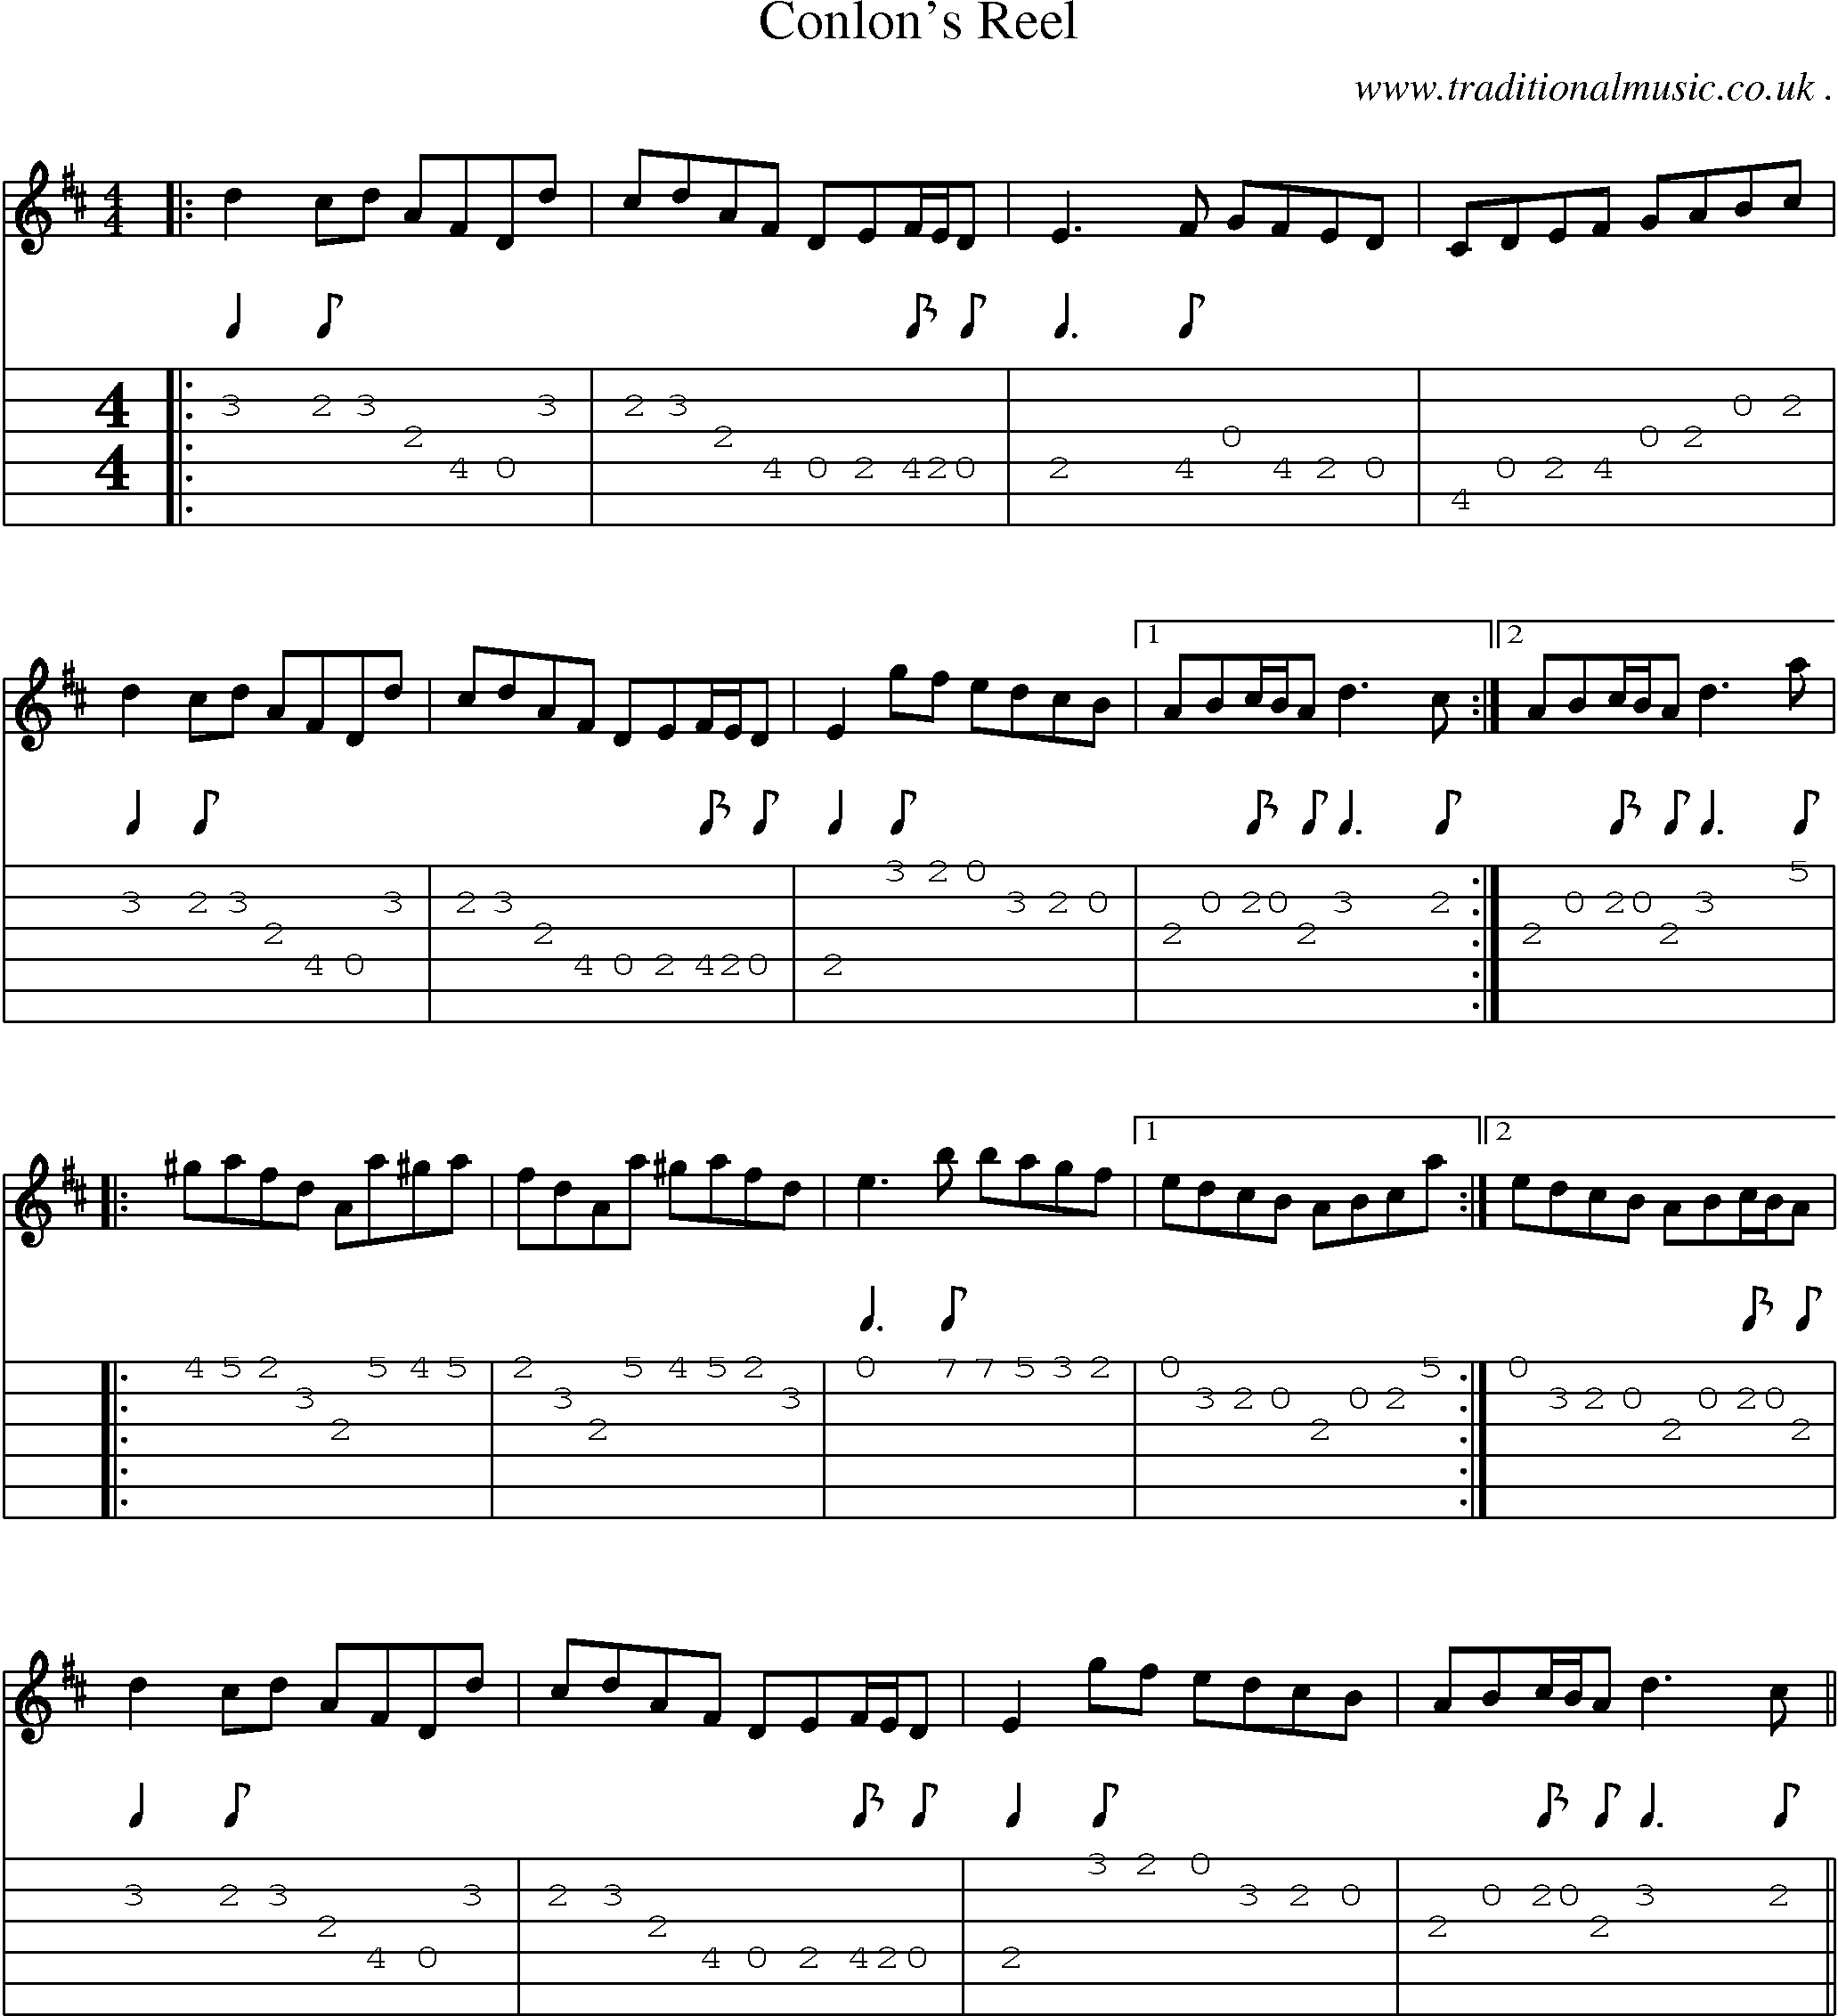 Sheet-Music and Guitar Tabs for Conlons Reel